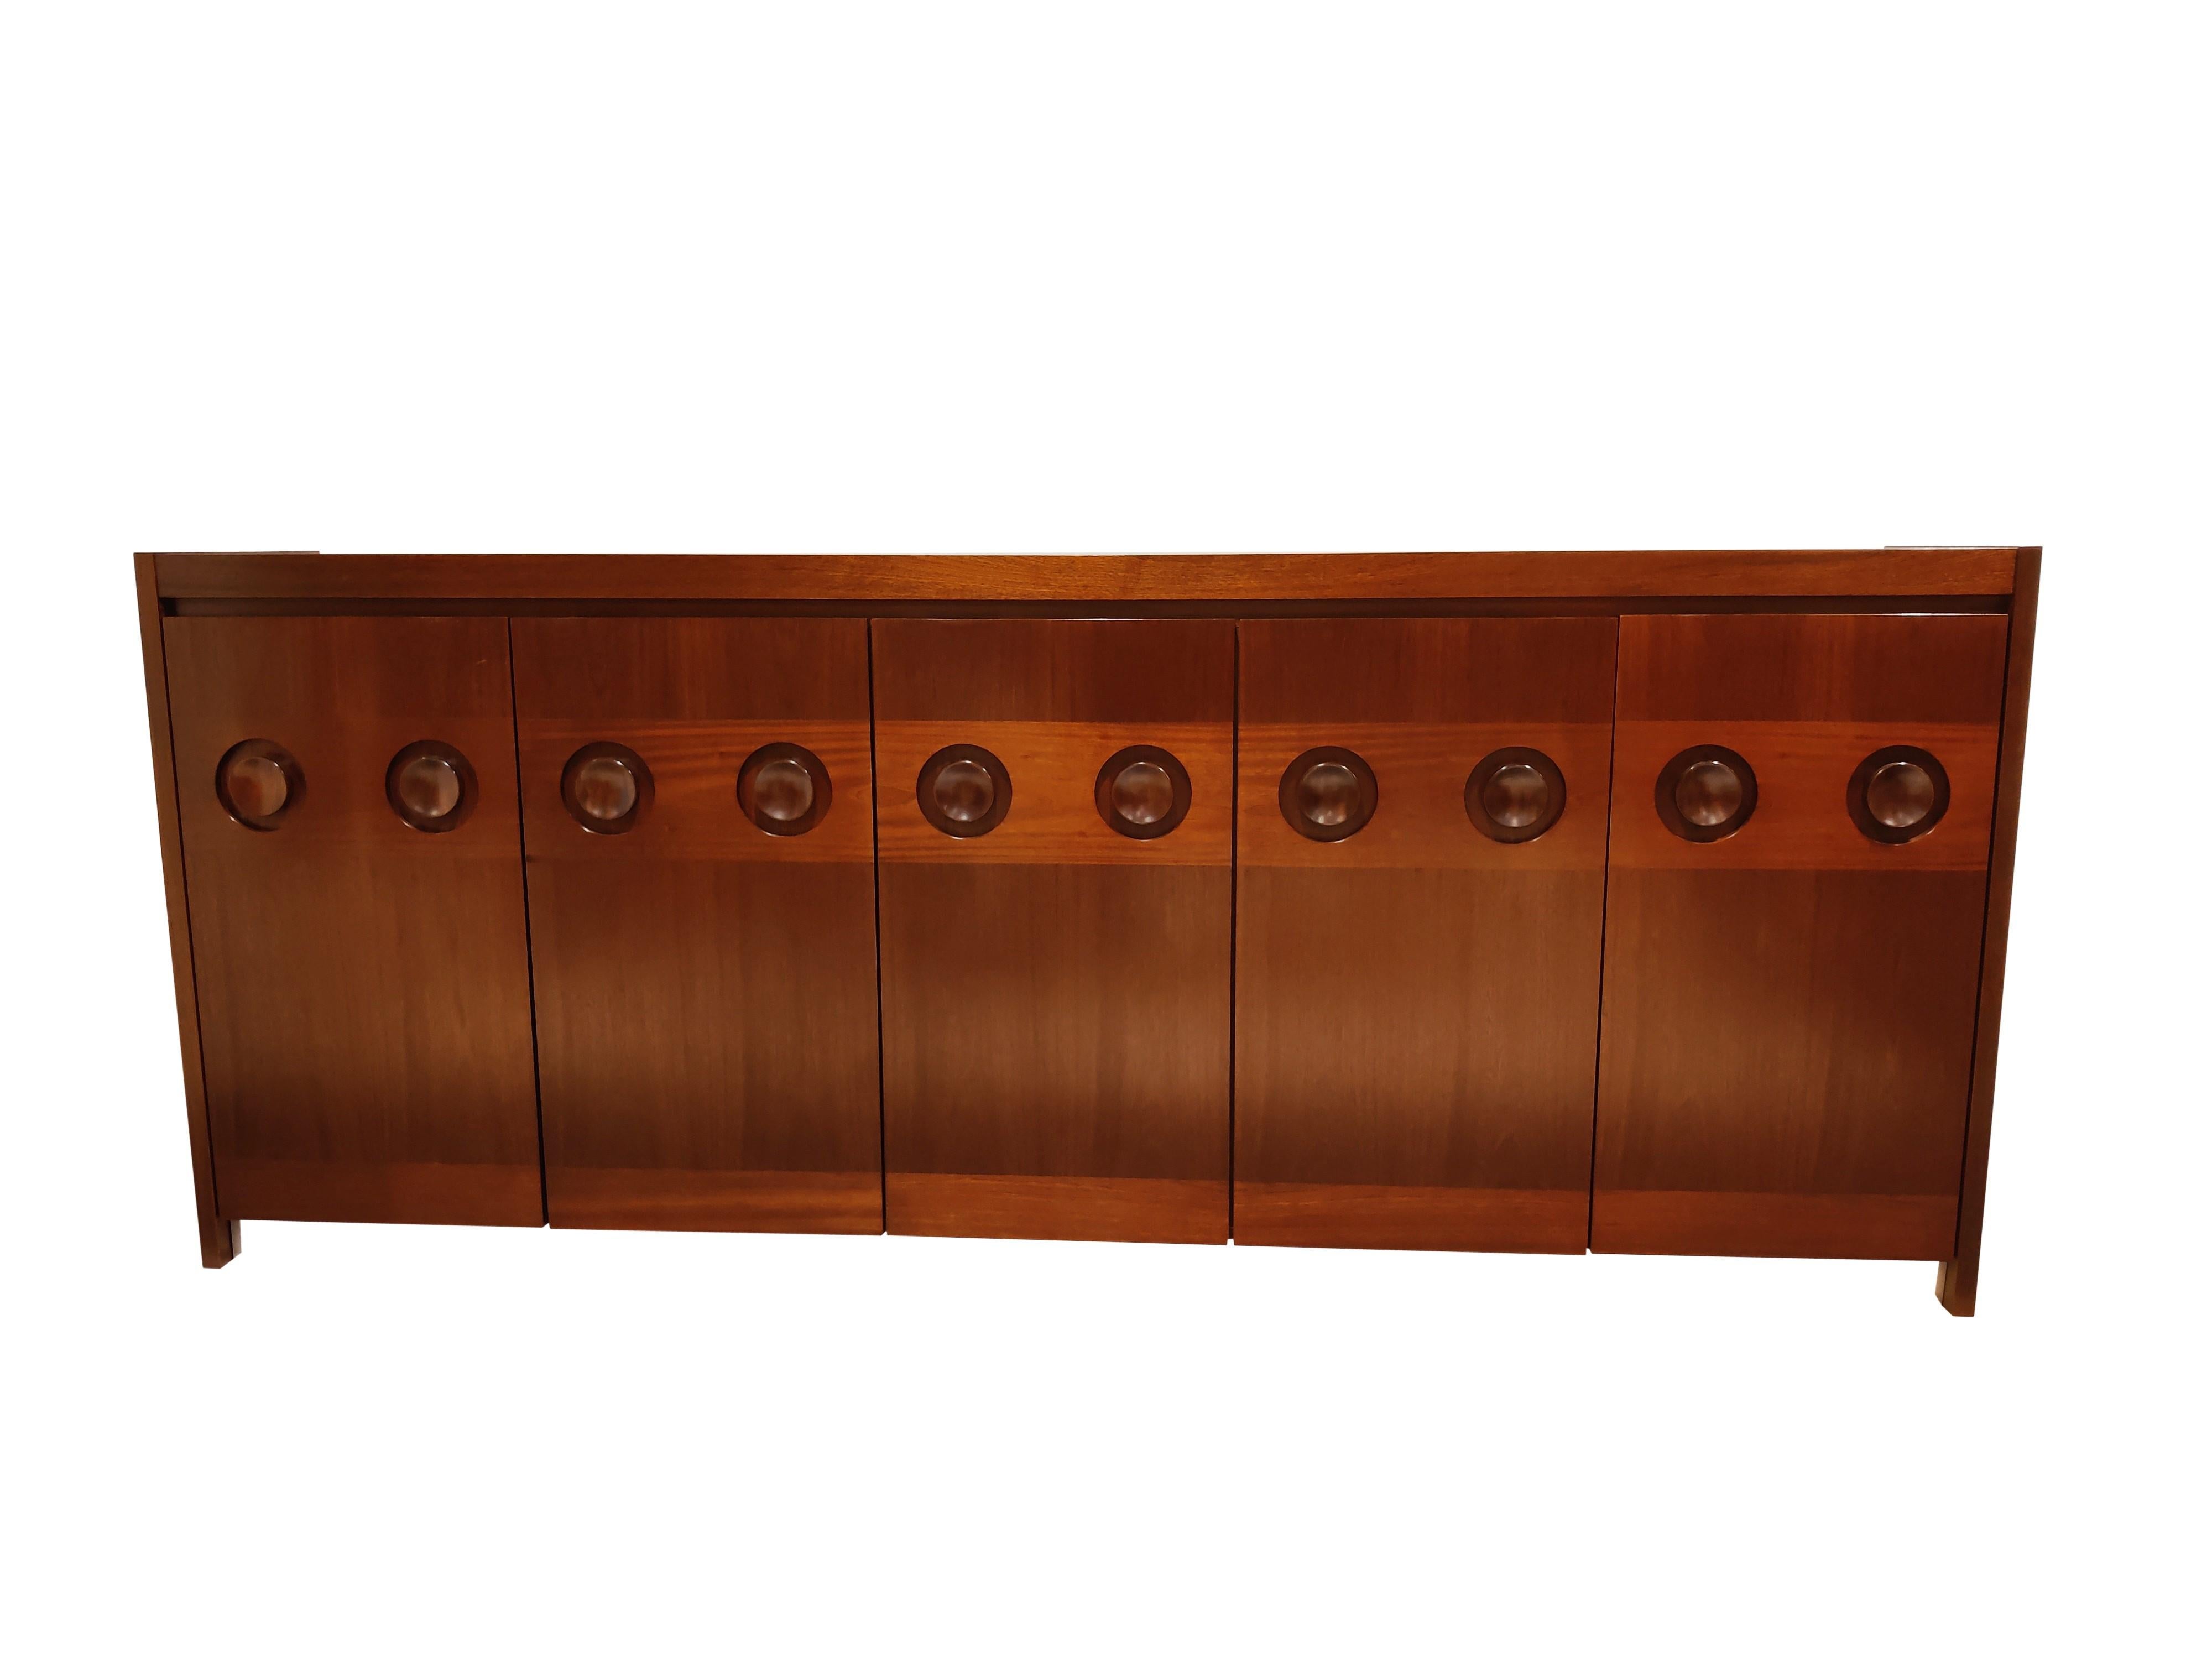 Brown Brutalist credenza with 5 graphical doors.

Beautiful timeless design and a real eye catcher for your living room.

Very good condition,

1970s, Belgium

Dimensions:

Length 260cm/102.36